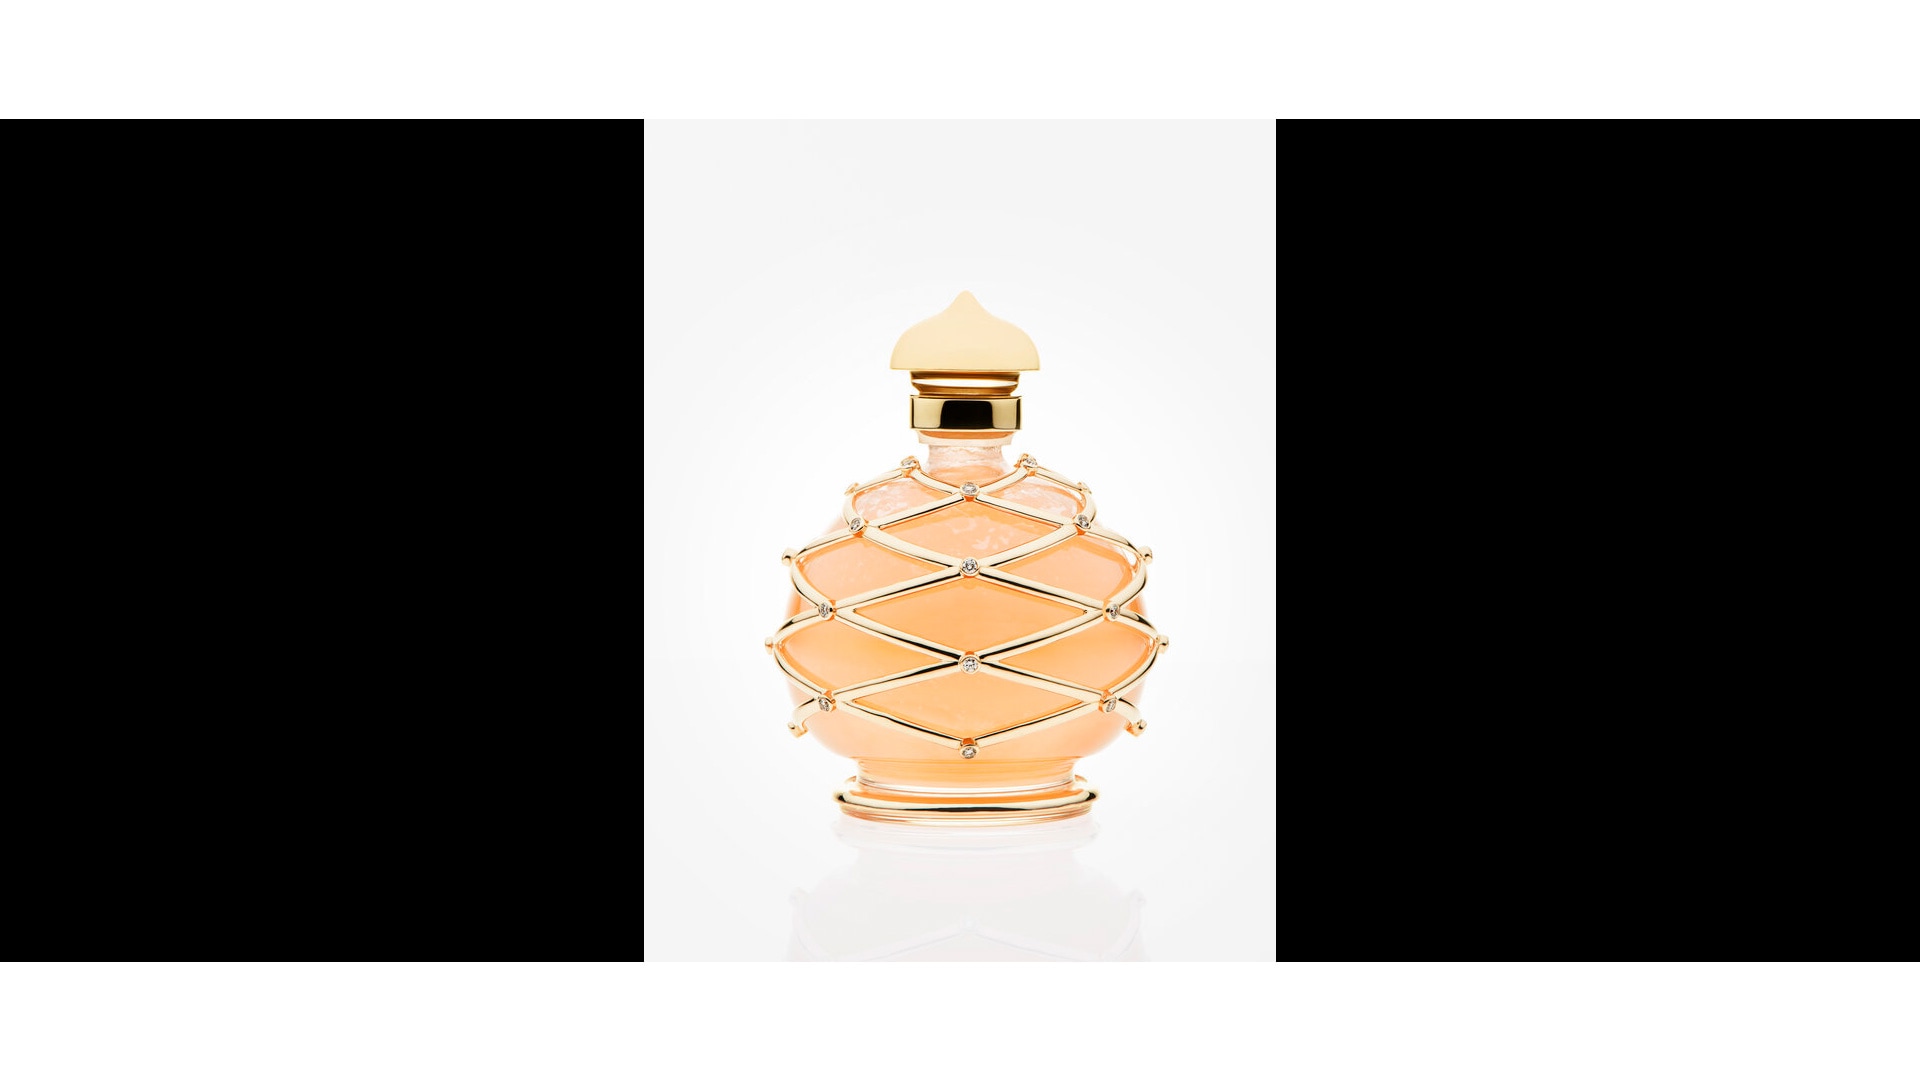 Luxury Christmas gifts: Henry Jacques, Dior, La Mer, Louis Vuitton and more  - Millionaireasia